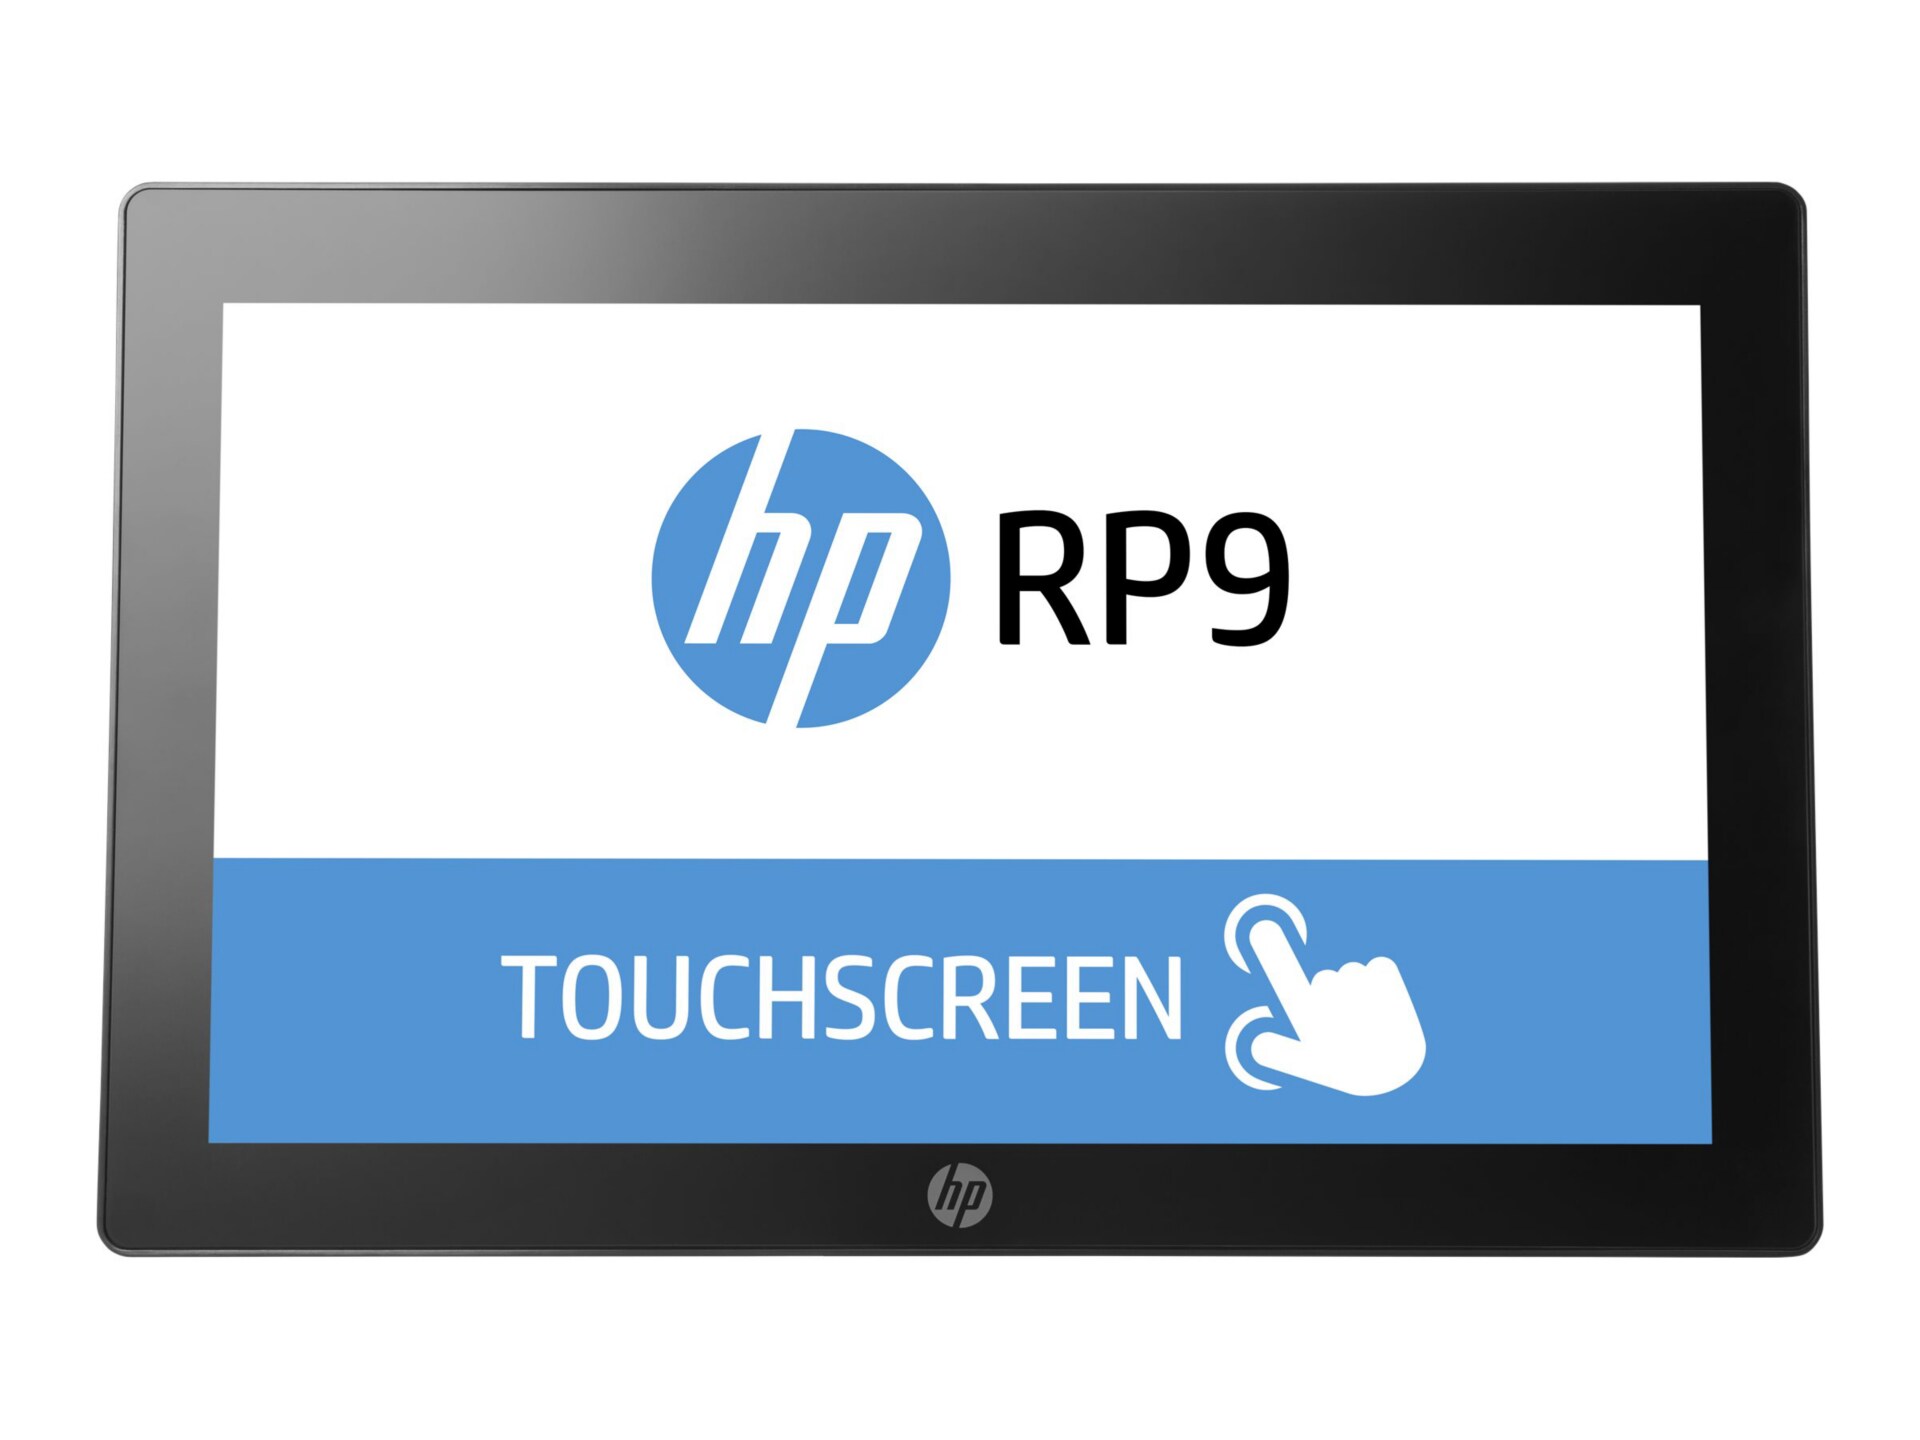 HP RP9 G1 Retail System 9015 - all-in-one - Core i5 6500 3.2 GHz - 4 GB - 500 GB - LED 15.6"